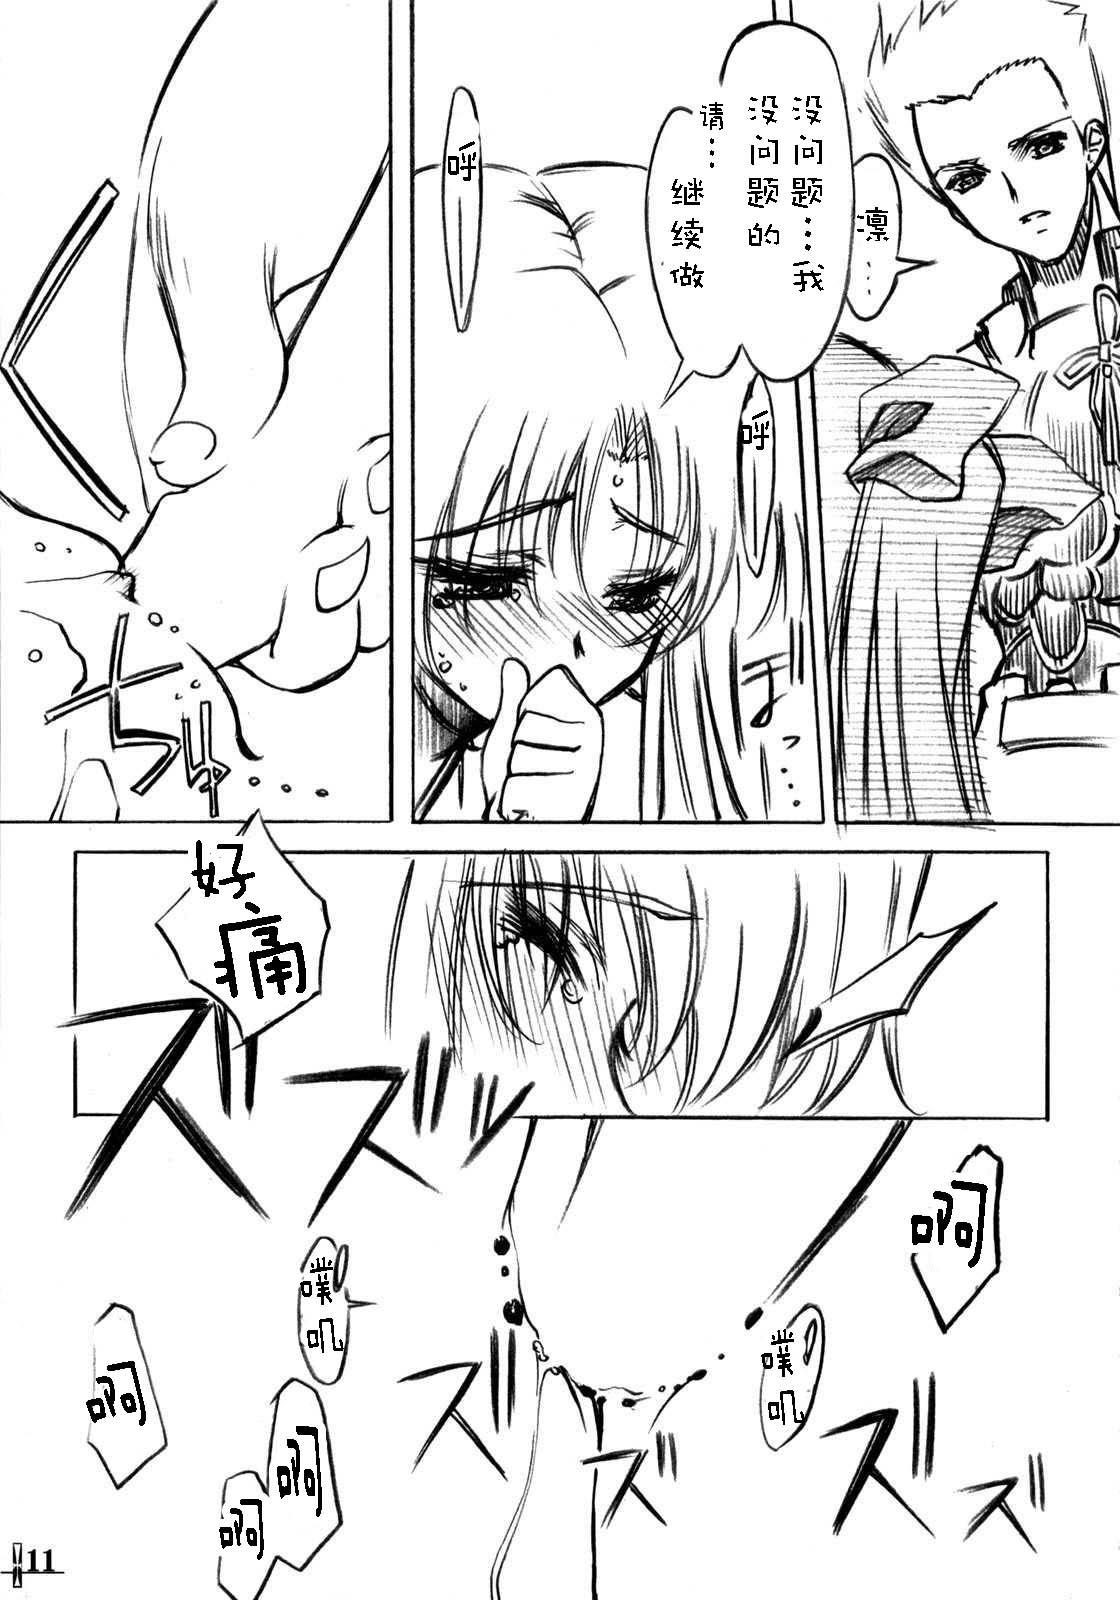 Blowjob Seven Cardinal Sins みりおんばんく - Fate stay night Jerk - Page 10